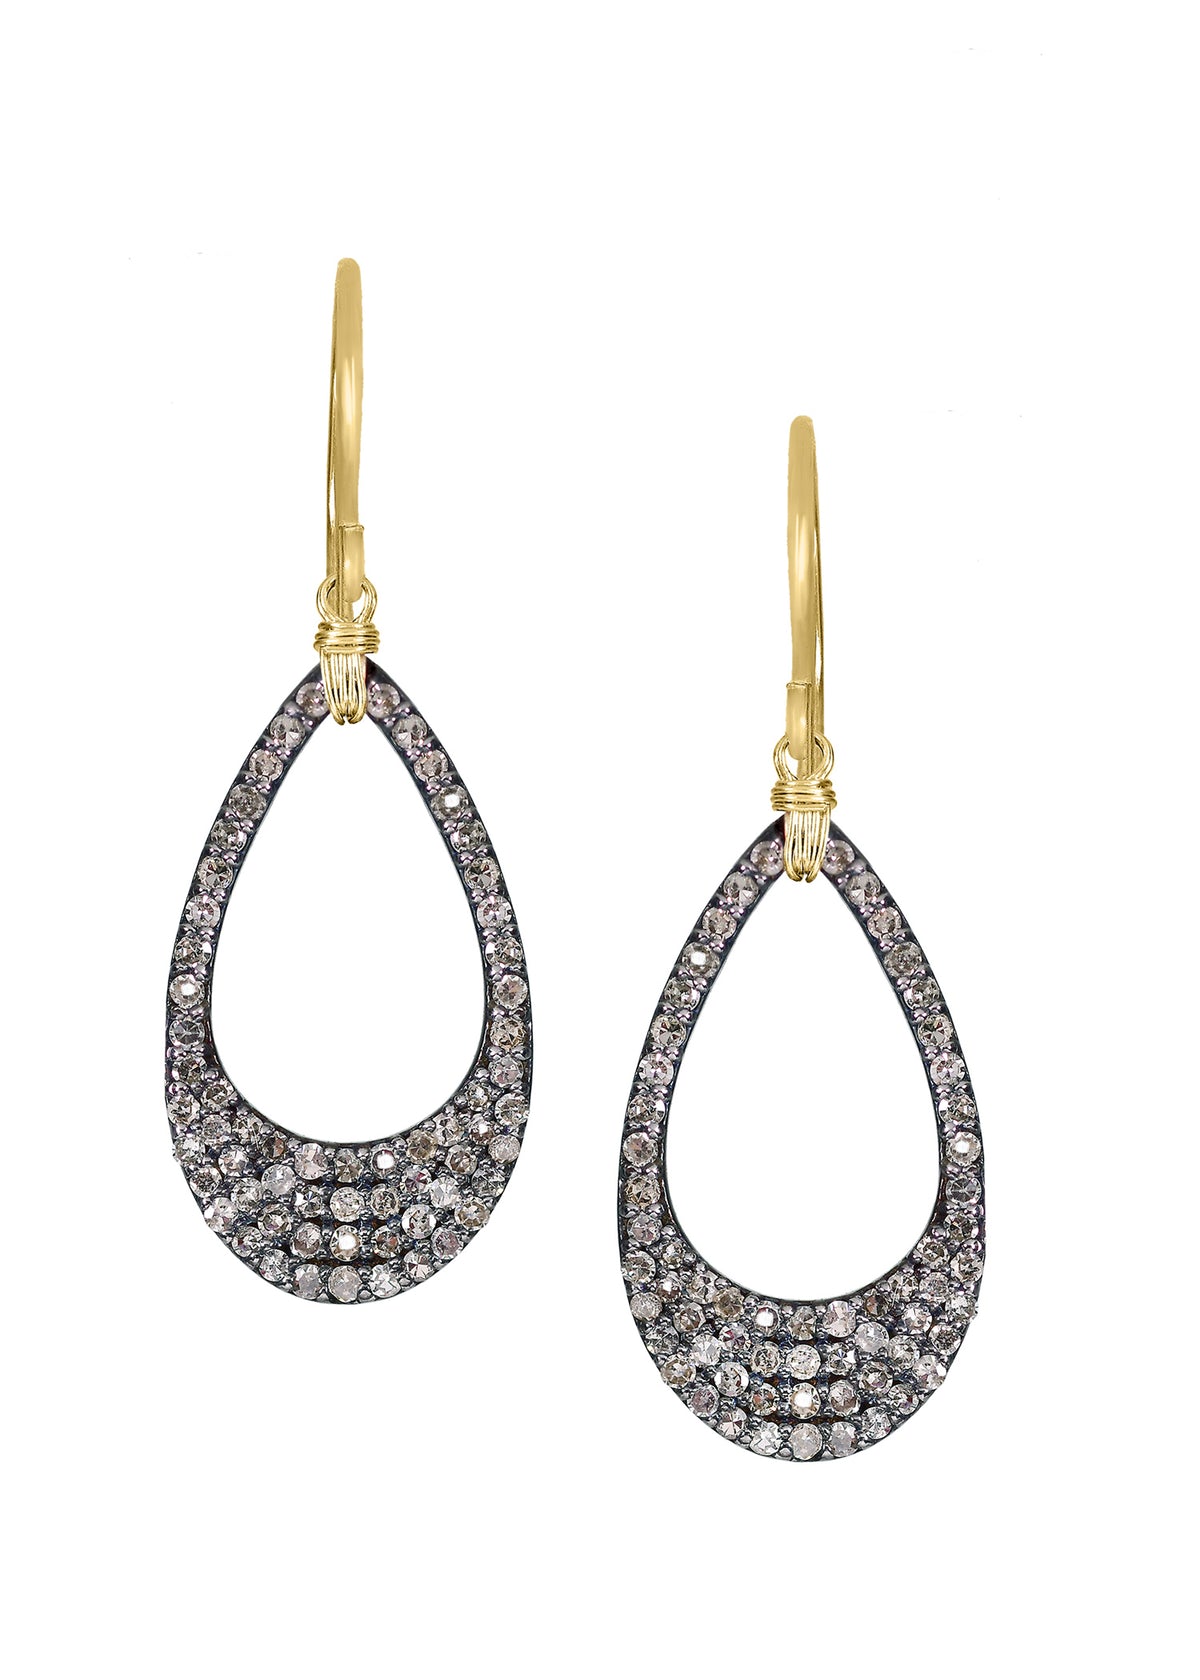 Diamond 14k gold Sterling silver Mixed metal Earrings measure 1-5/16&quot; in length (including the ear wires) and 1/2&quot; in width at the widest point Special order only Handmade in our Los Angeles studio